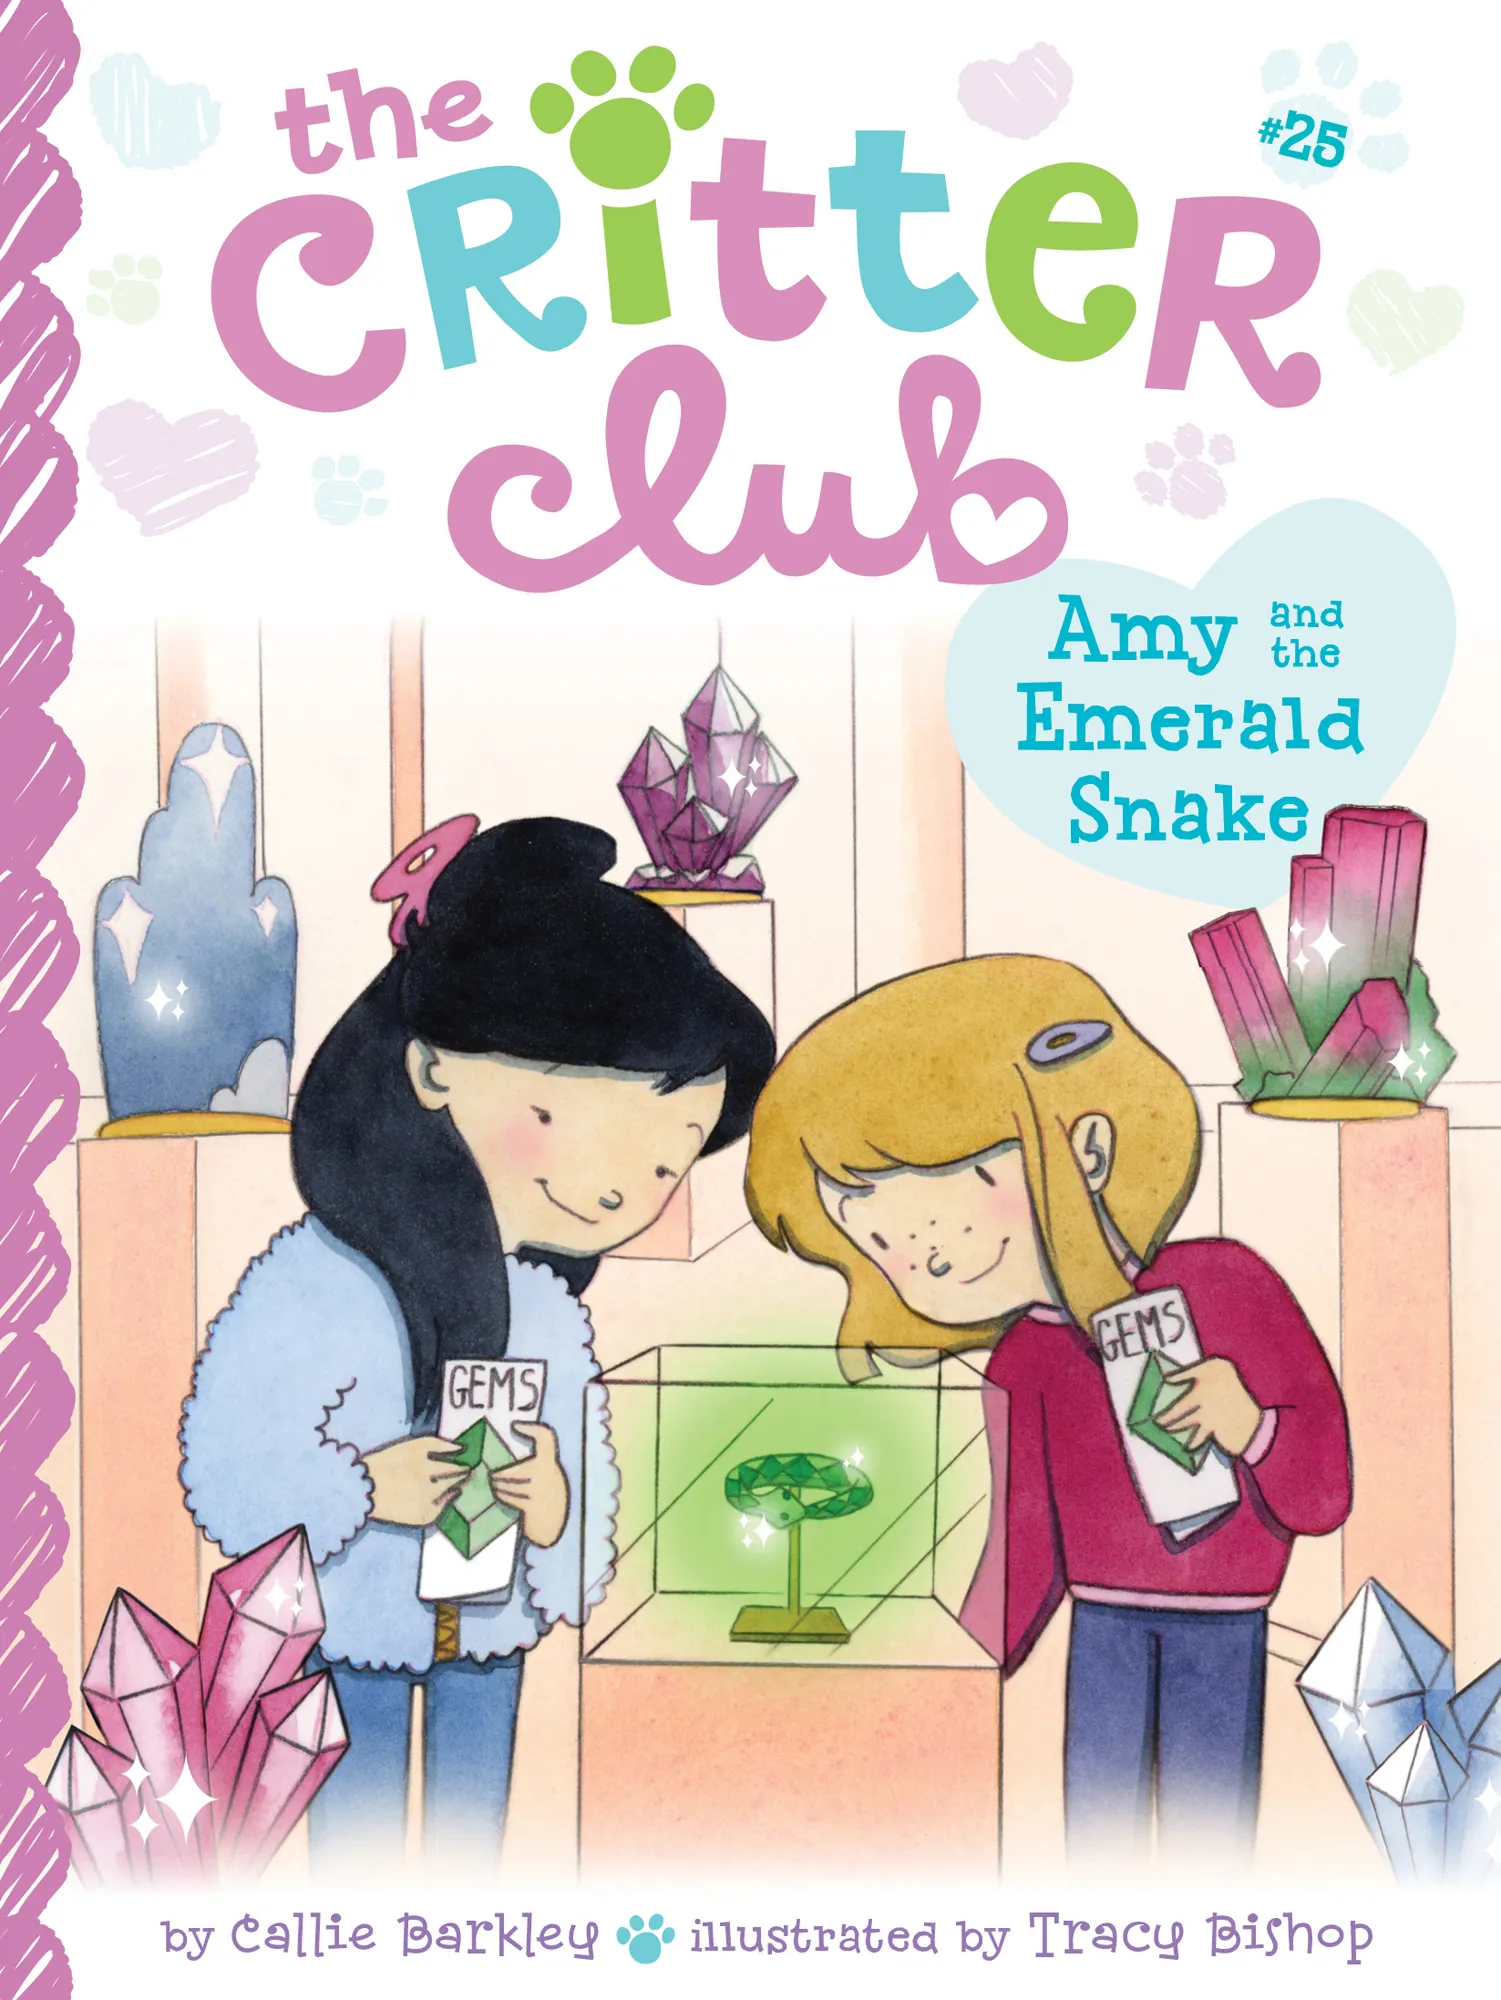 Amy and the Emerald Snake (The Critter Club #25)